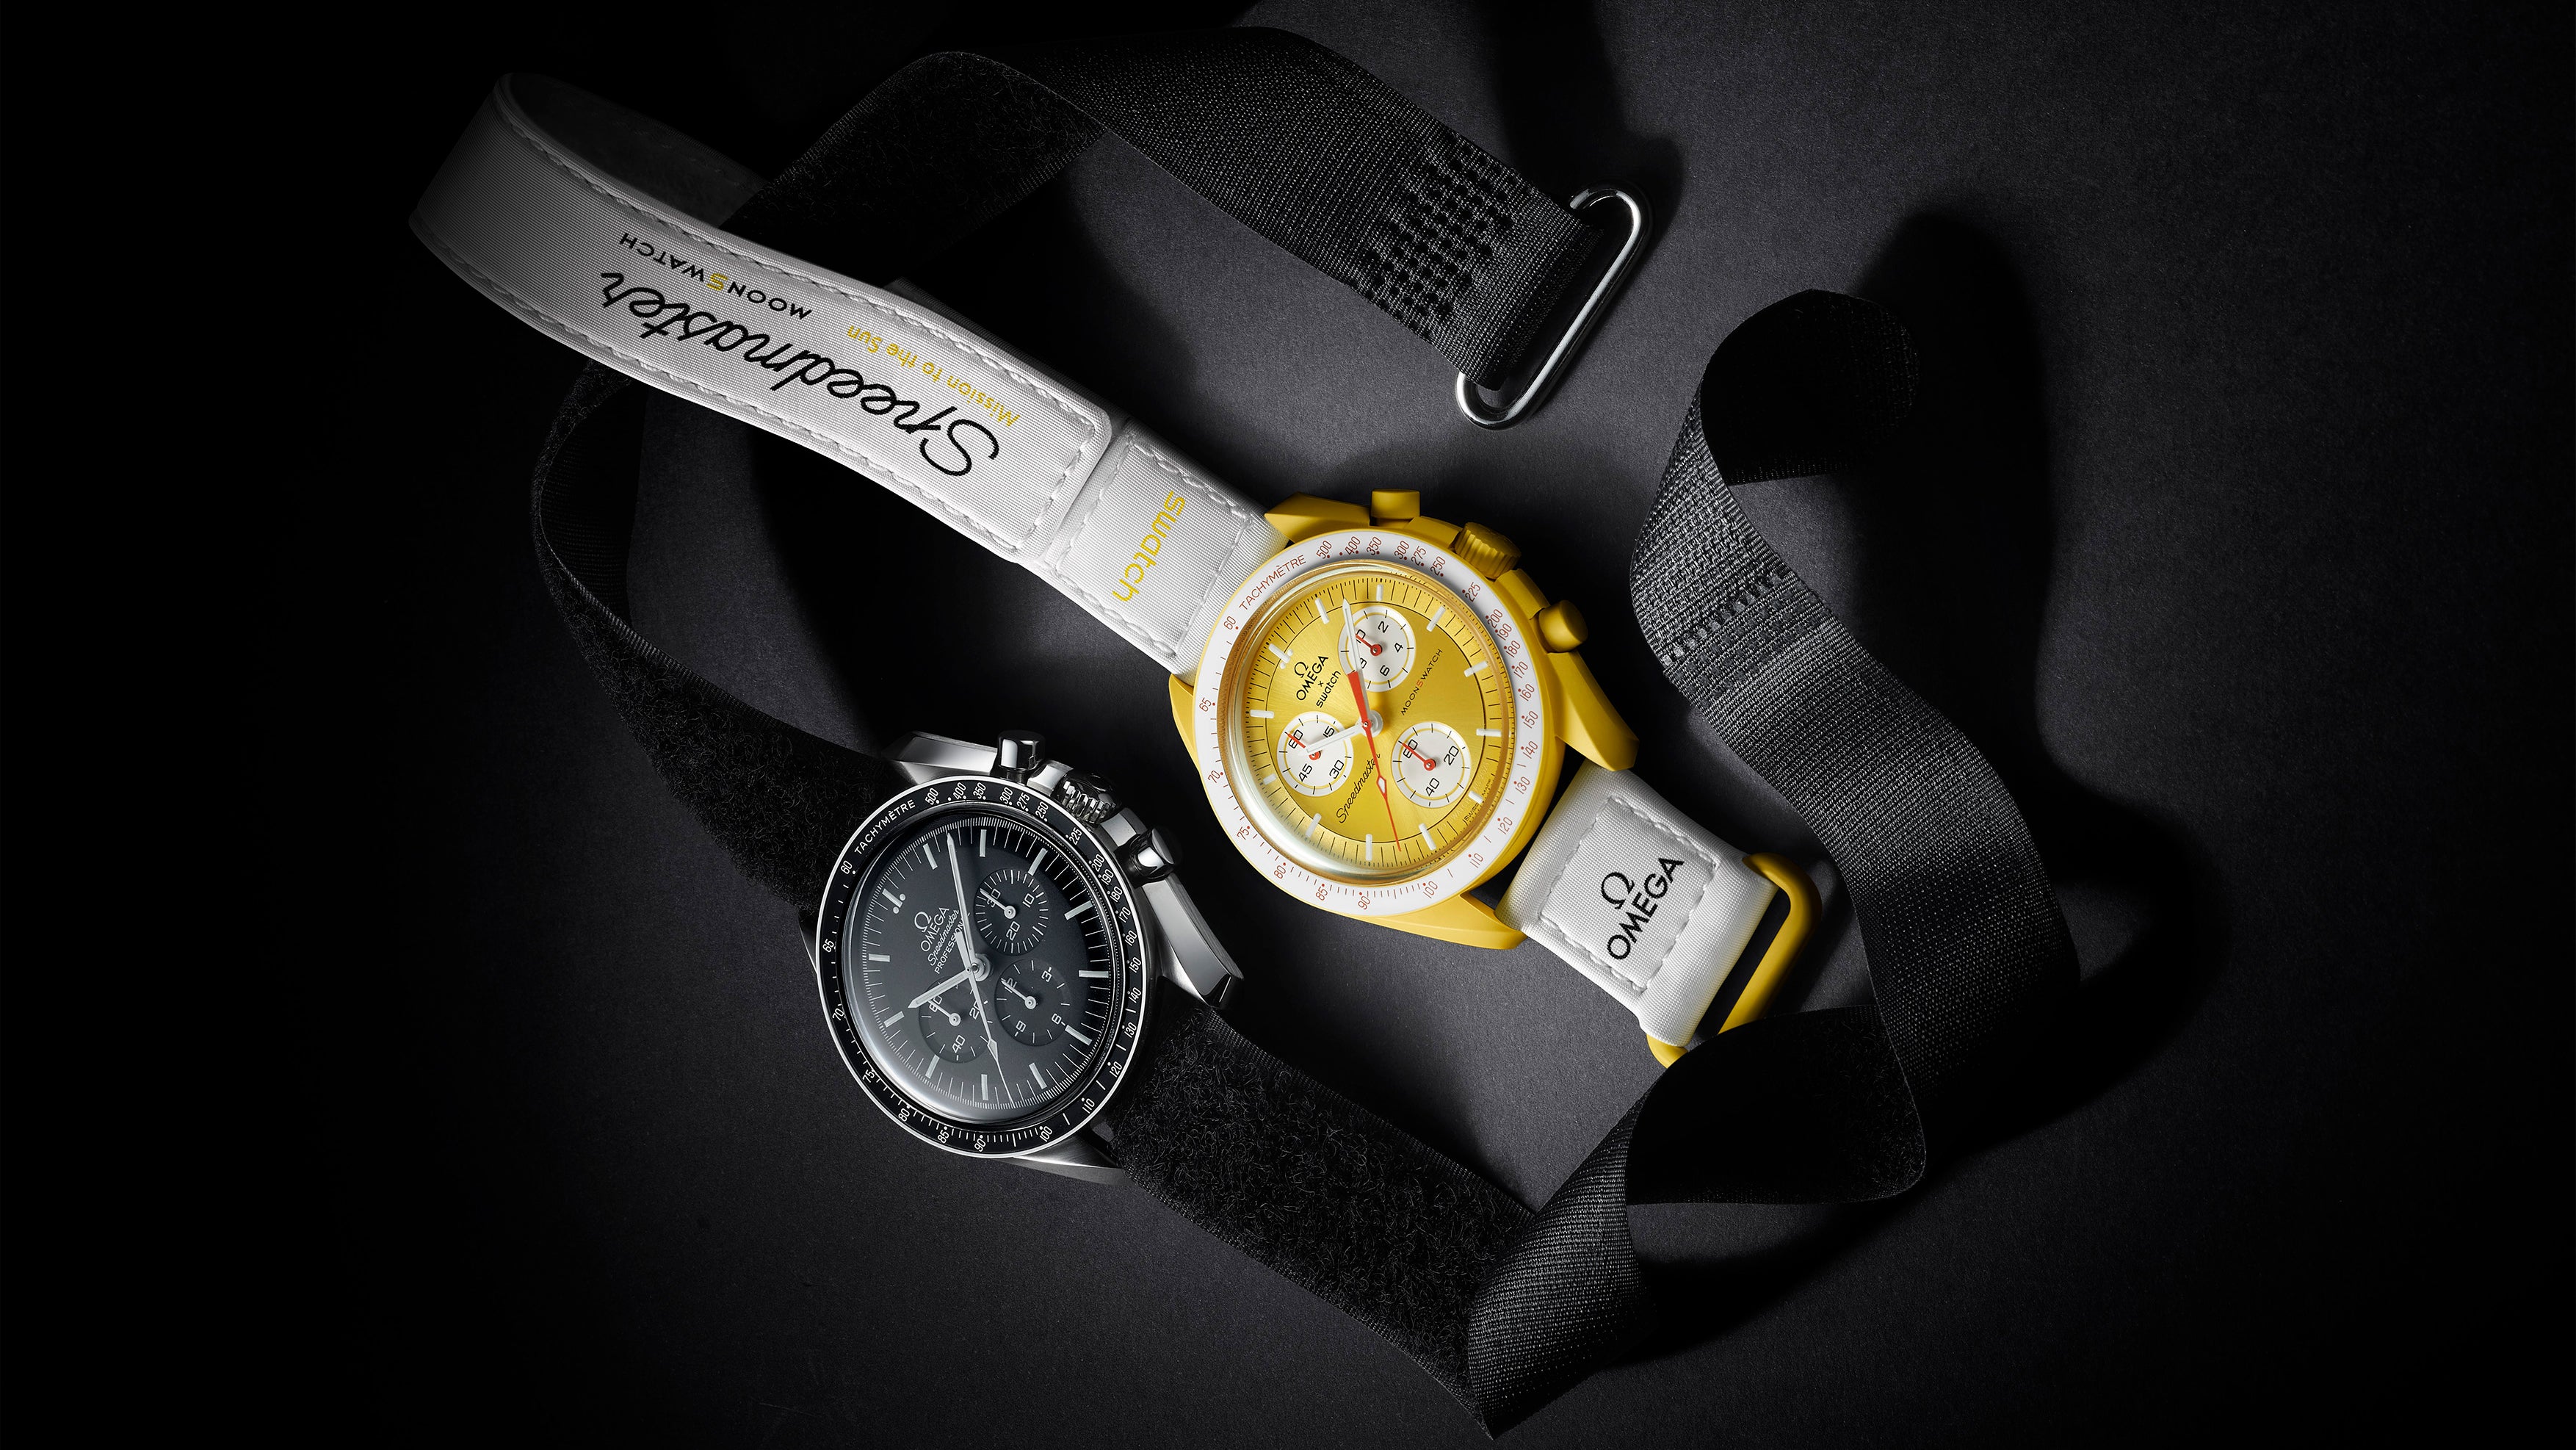 Omega and Swatch Created a More Affordable Version of the Watch Worn on the Moon